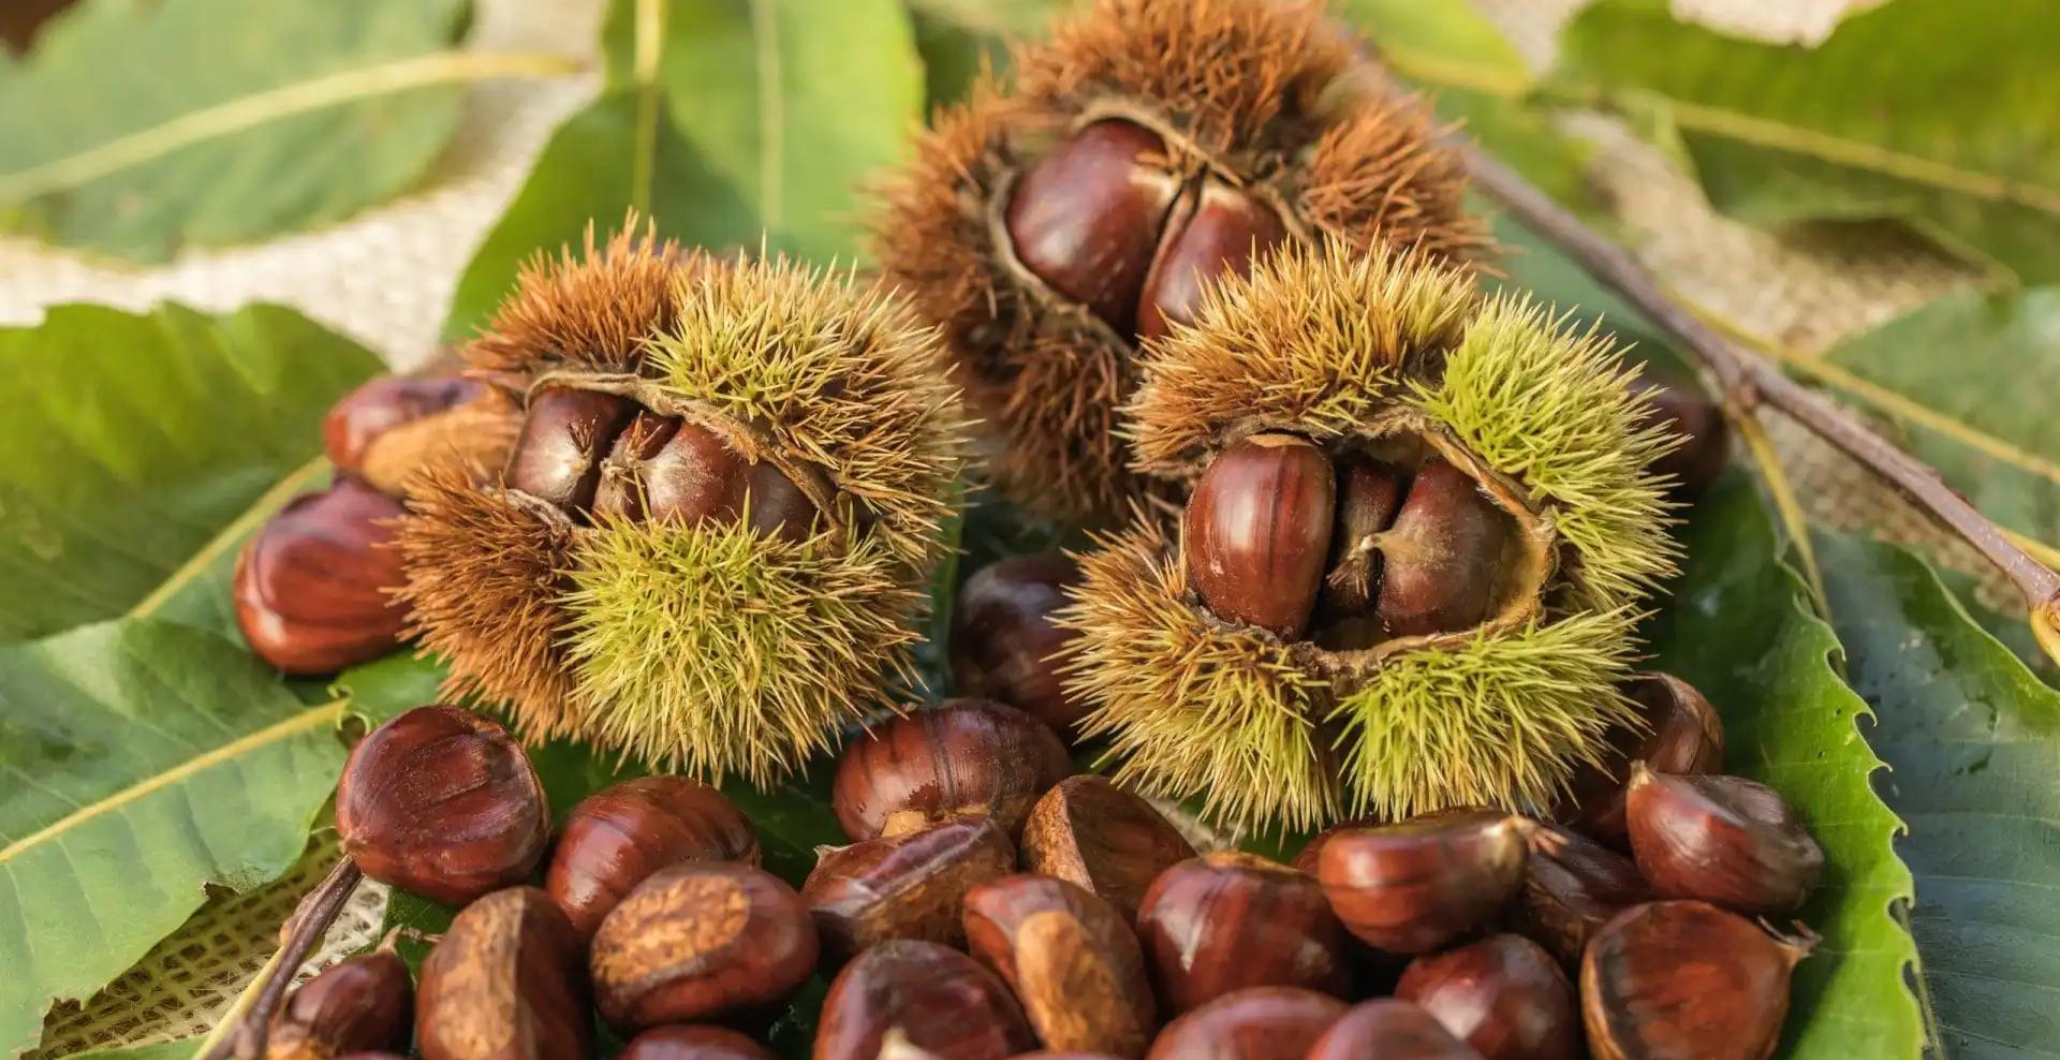 The American Chestnut: How Will the Story Go?